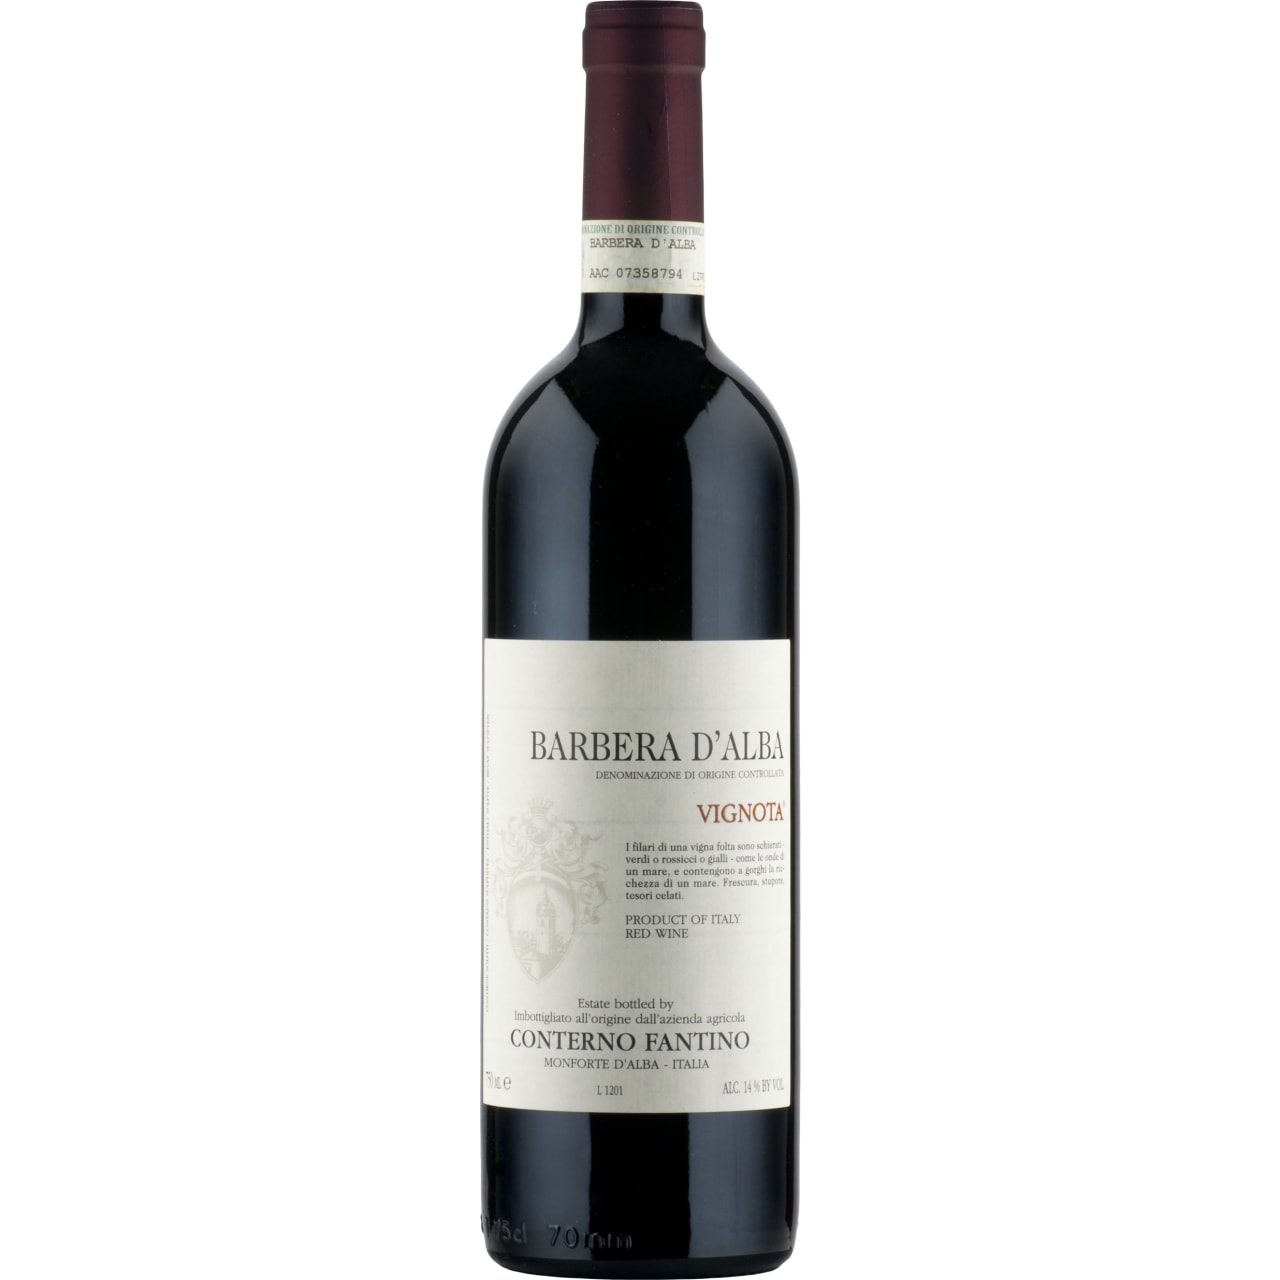 A ruby red color with a delicately fruity bouquet, with hints of small ripe red fruits.